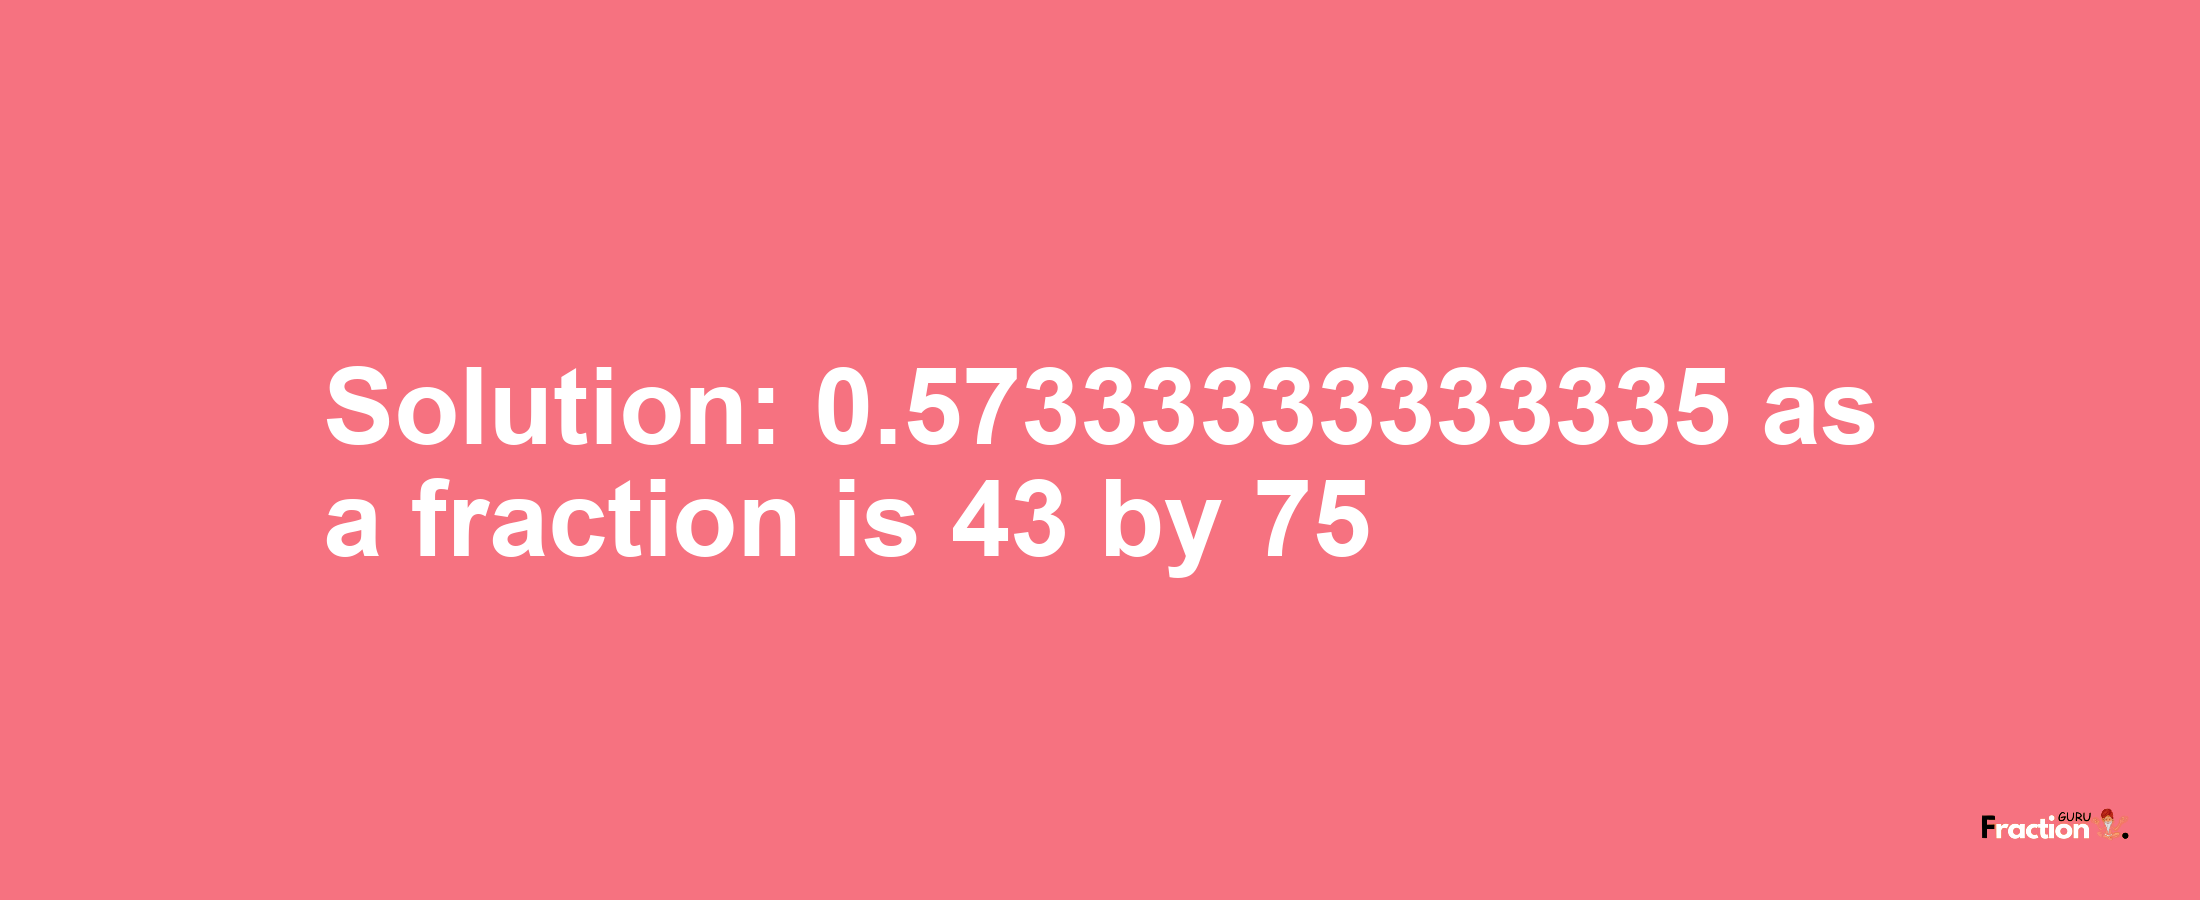 Solution:0.57333333333335 as a fraction is 43/75